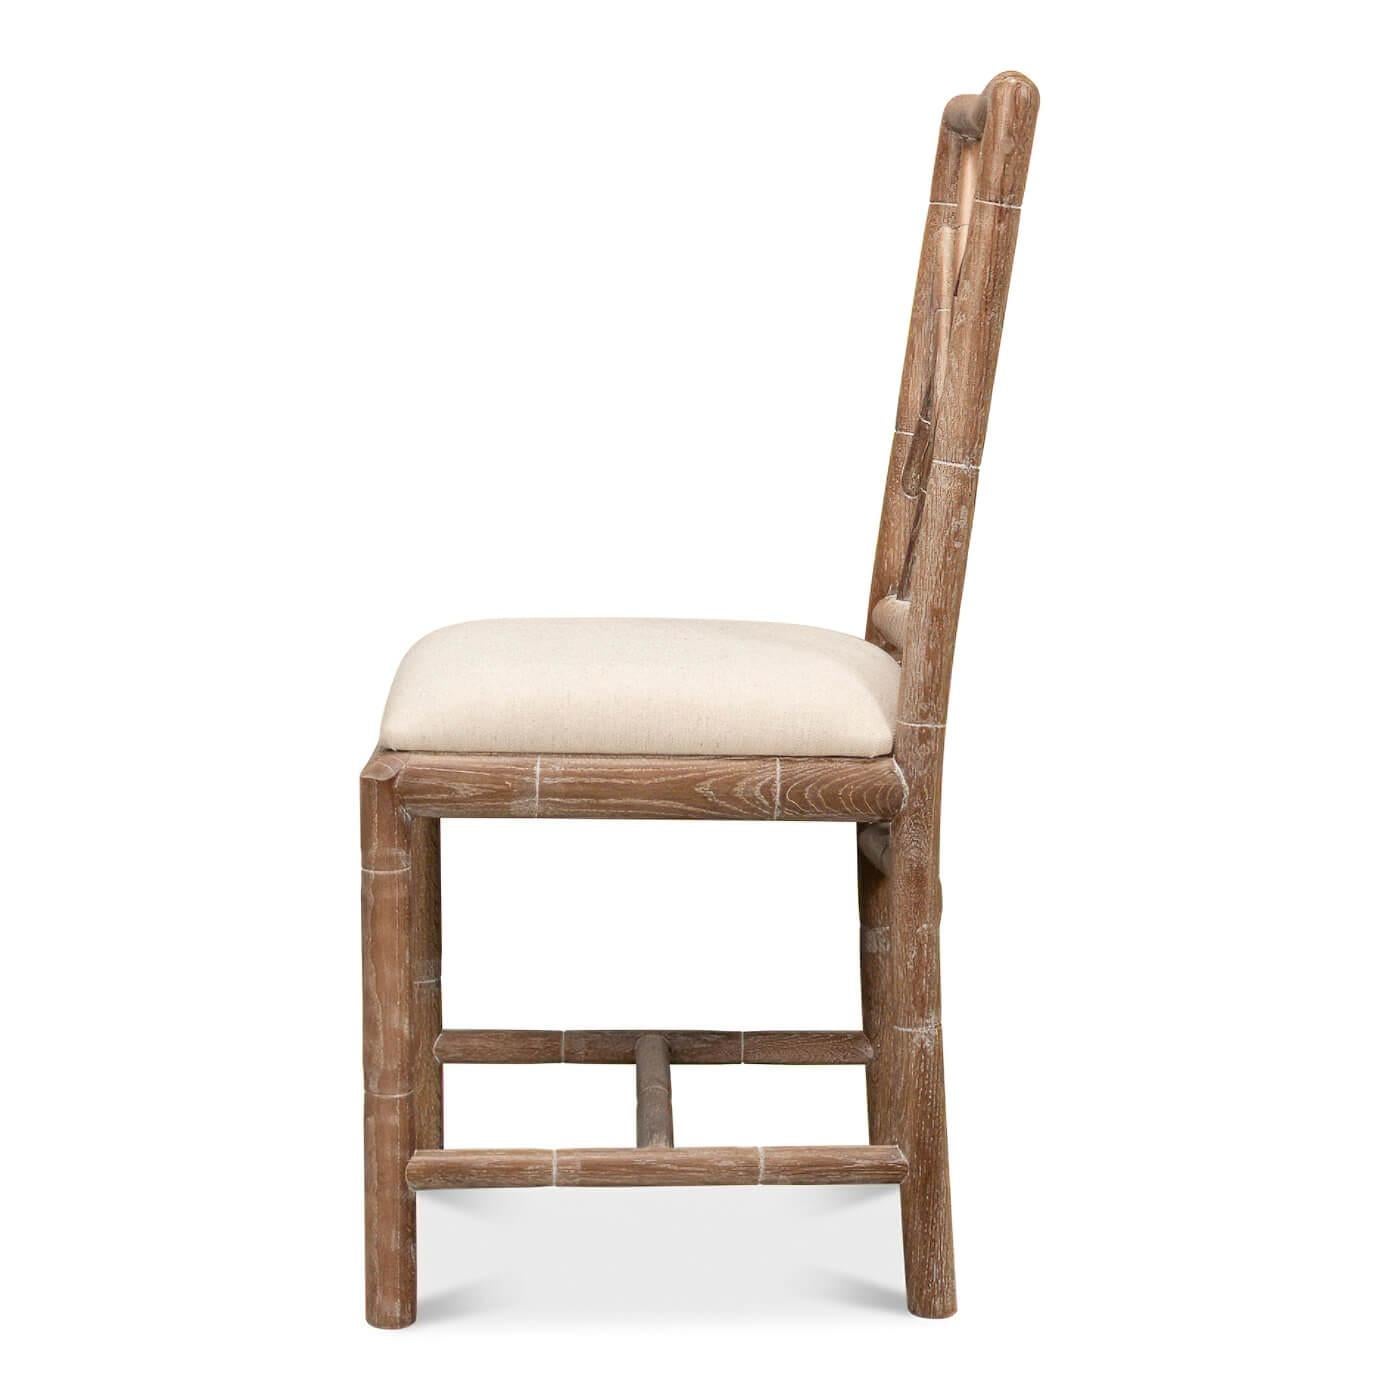 A Regency-style faux bamboo side chair. This hand-carved chair with a faux bamboo motif is inspired by designs of the Brighton Pavillion. It is shown in our whitewash oak finish with a linen seat. 

Dimensions: 17